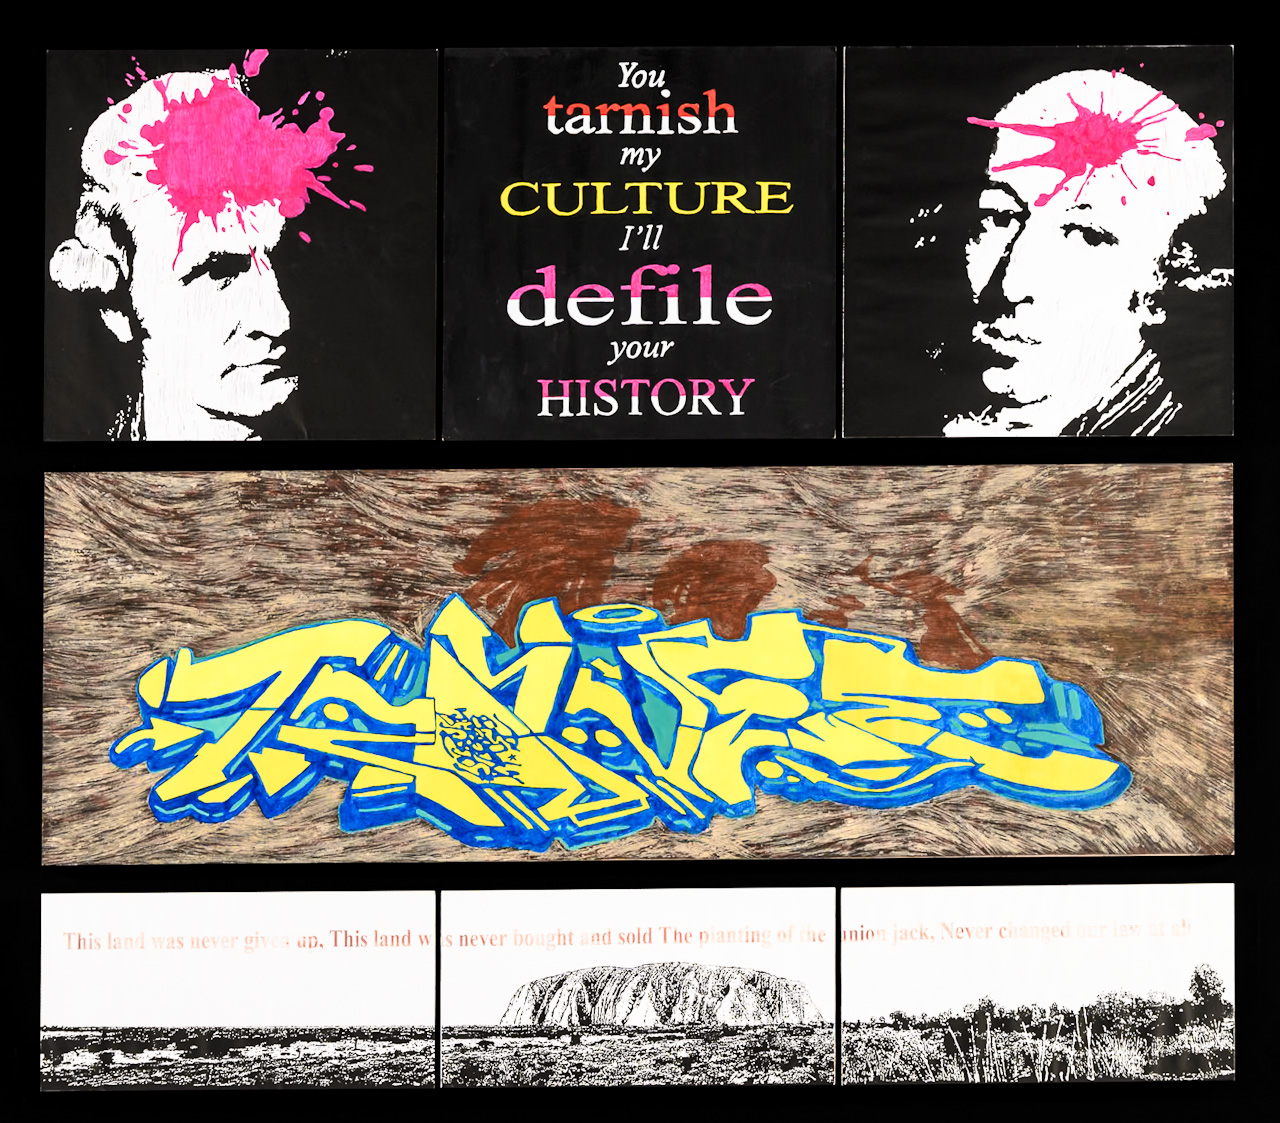 A series of drawings showing Caption Cook with splotches of paint, a graffiti tag and Uluru accompanied by the words "You tarnish my culture I'll defile your history".